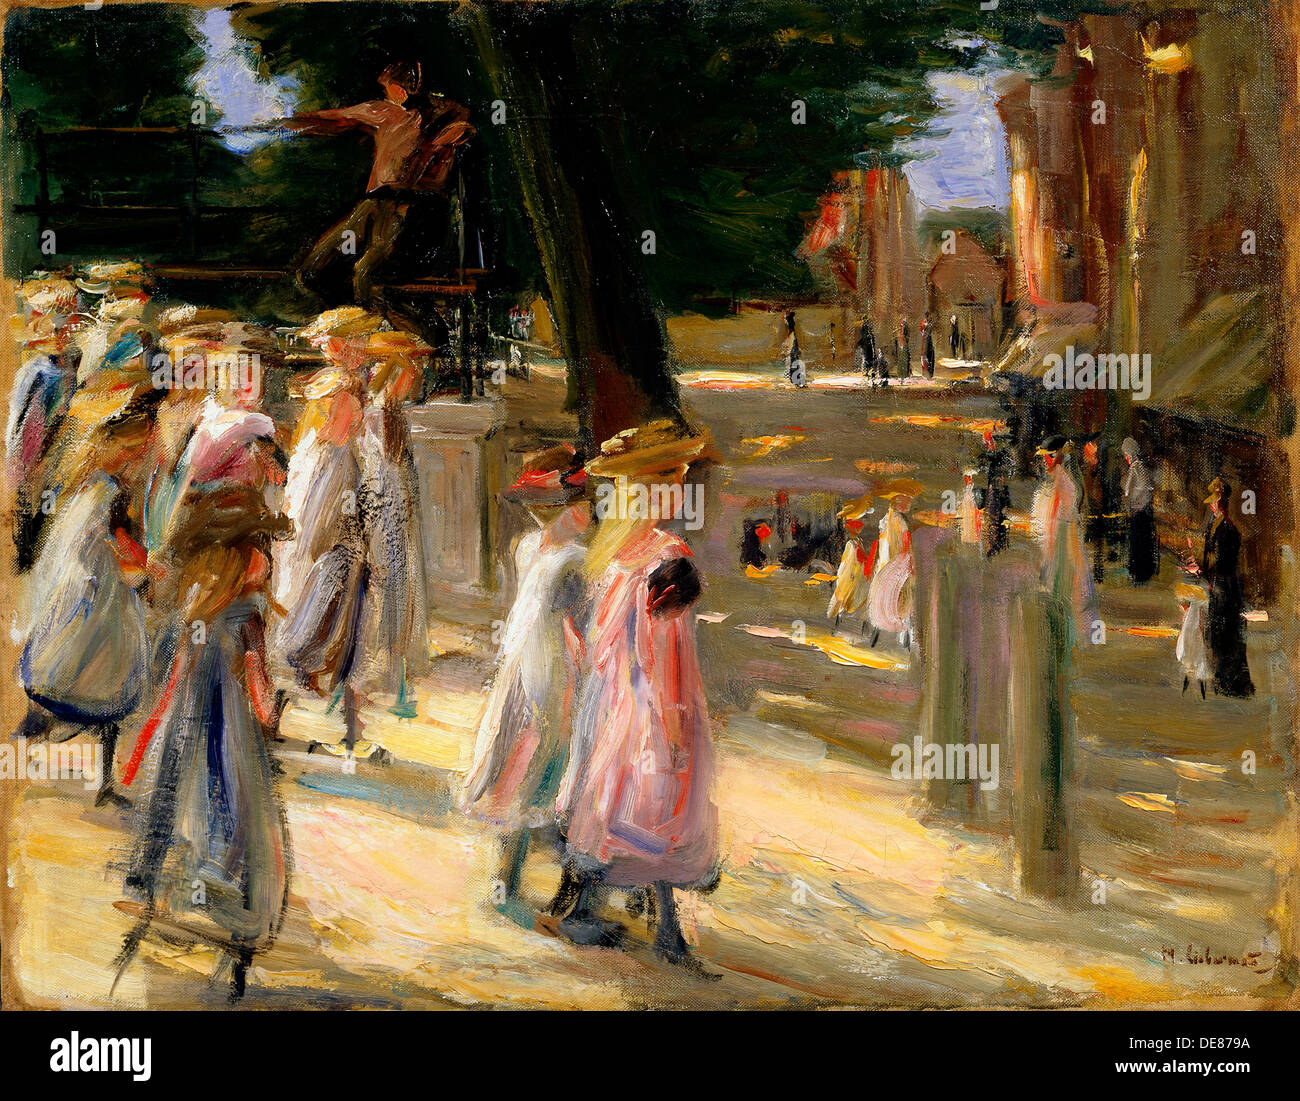 'The Road to the School at Edam', 19th or early 20th century.  Artist: Max Liebermann Stock Photo